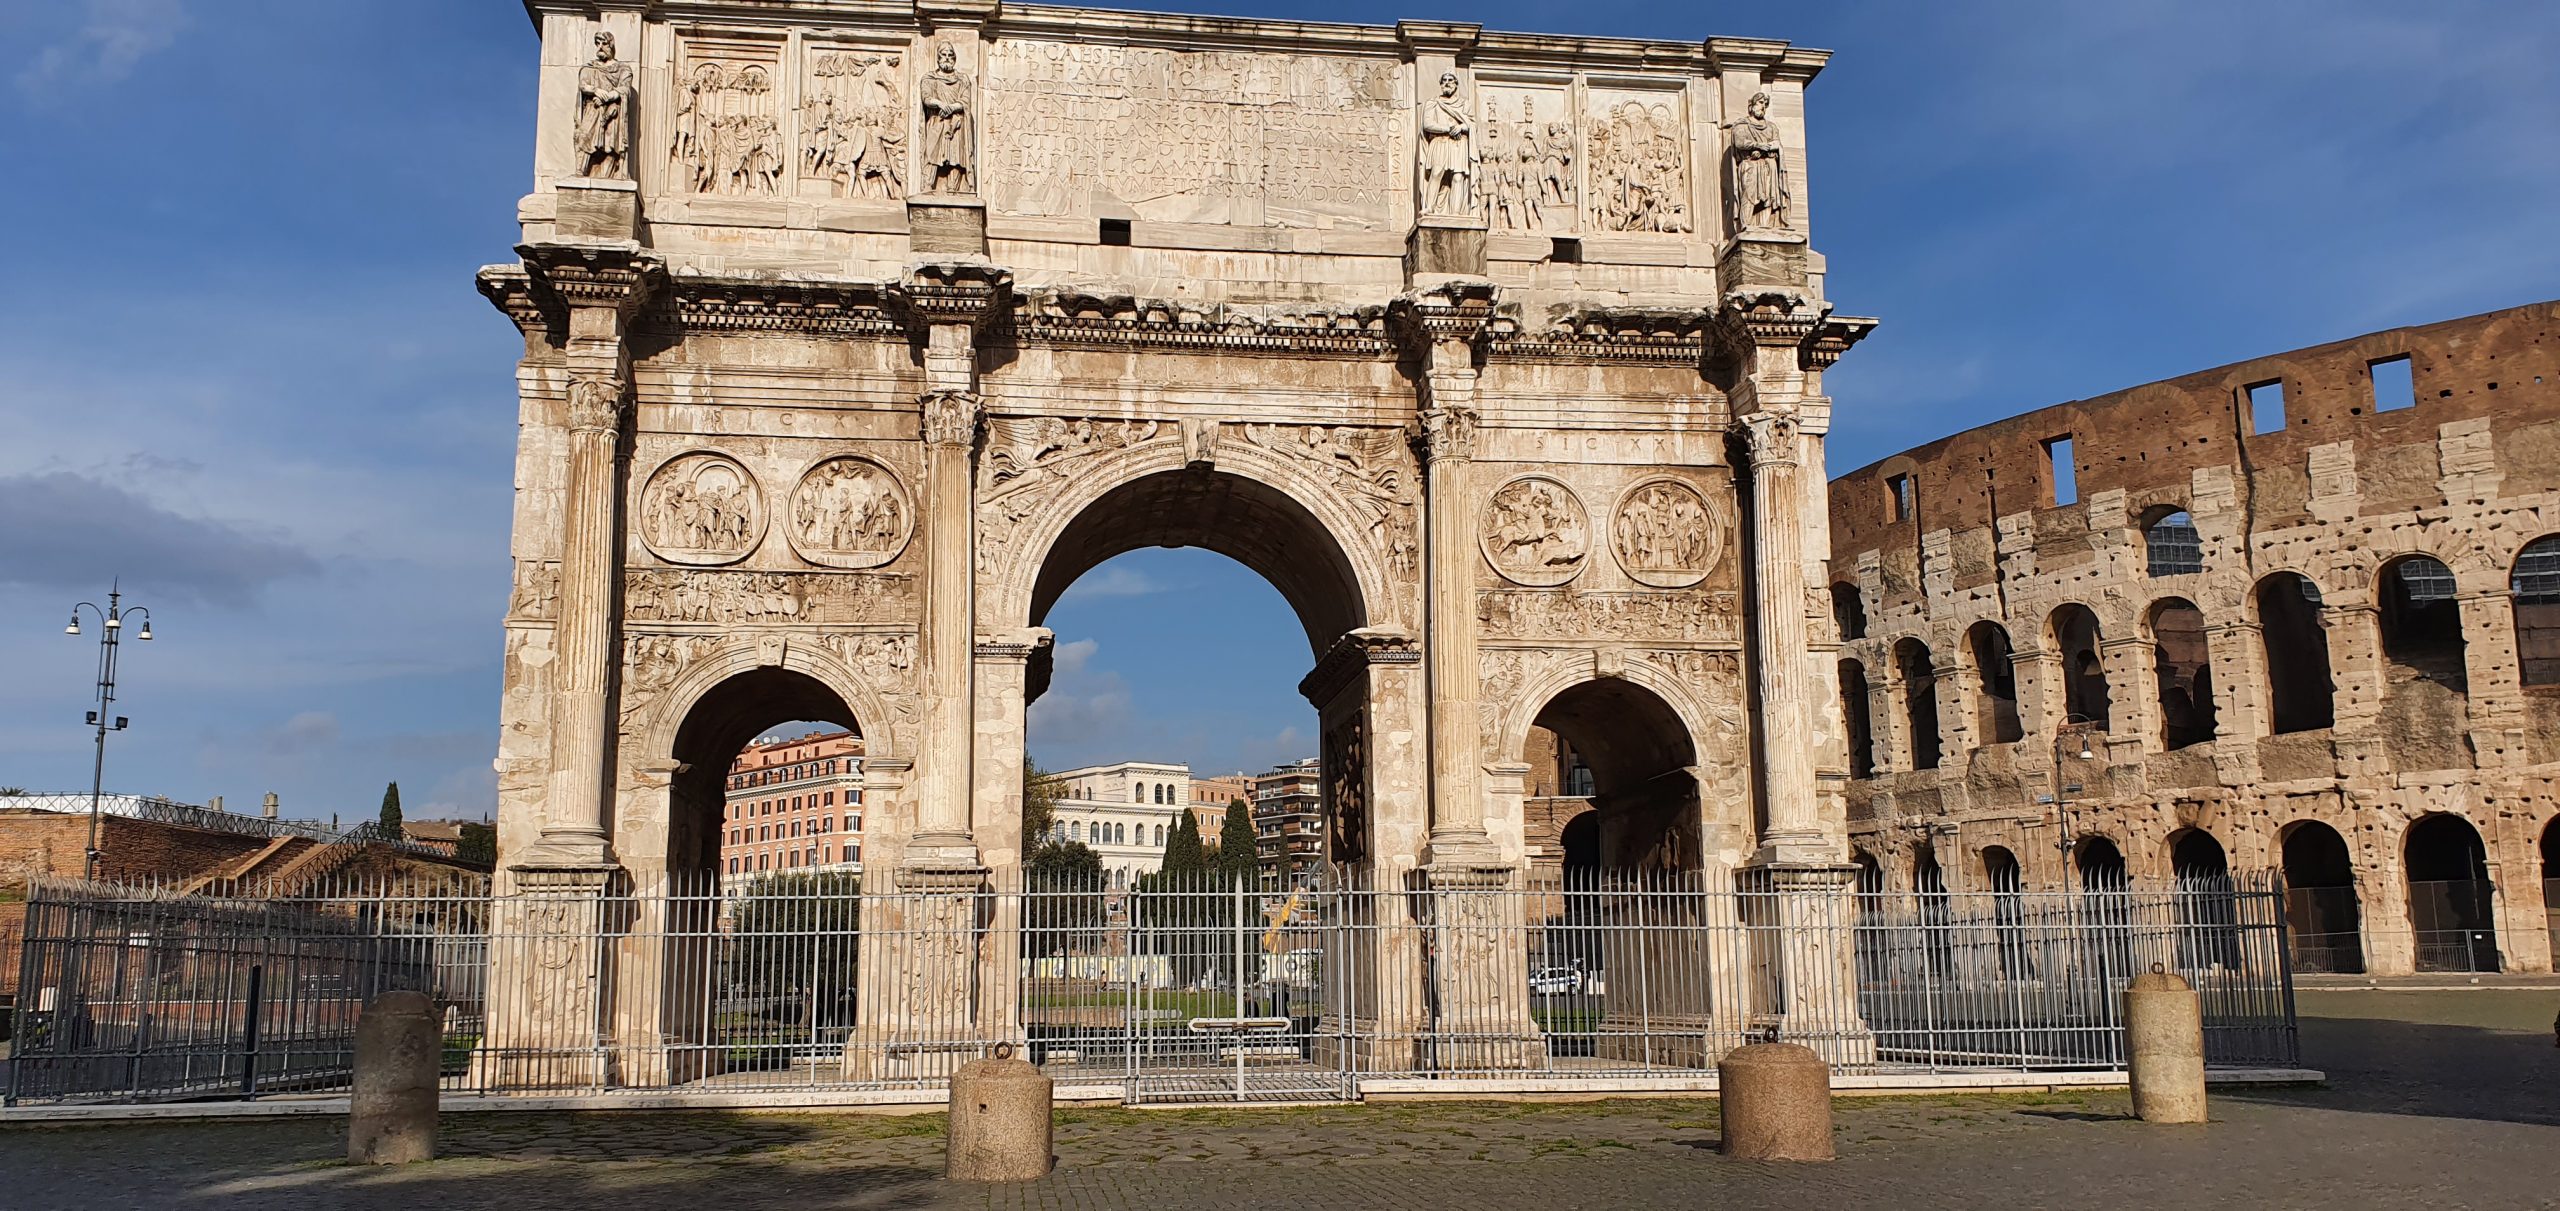 Arch of Costantin